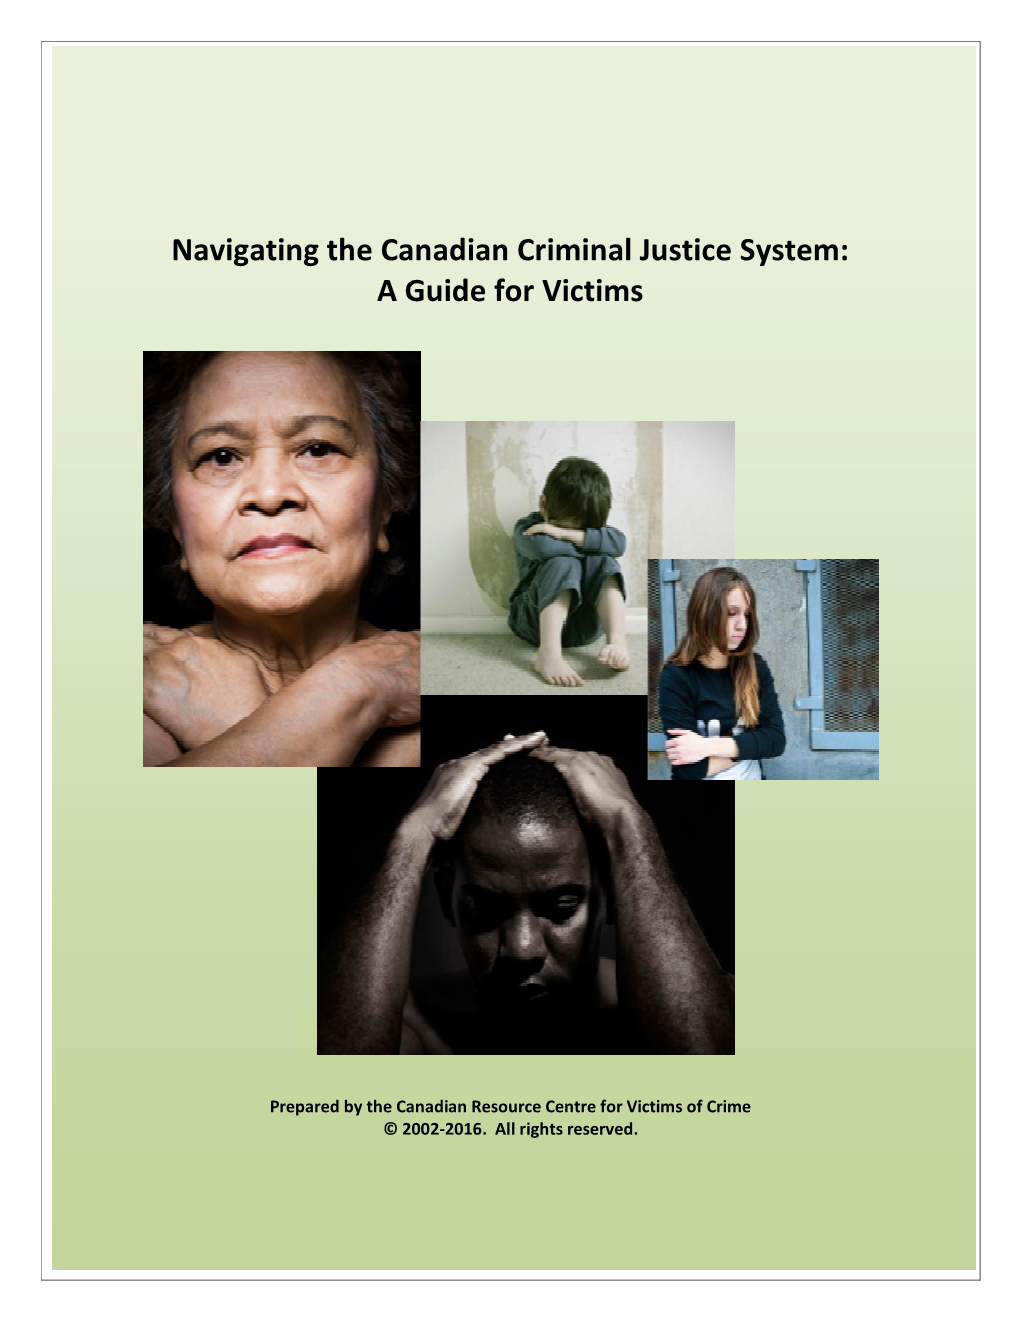 Navigating the Canadian Criminal Justice System: a Guide for Victims